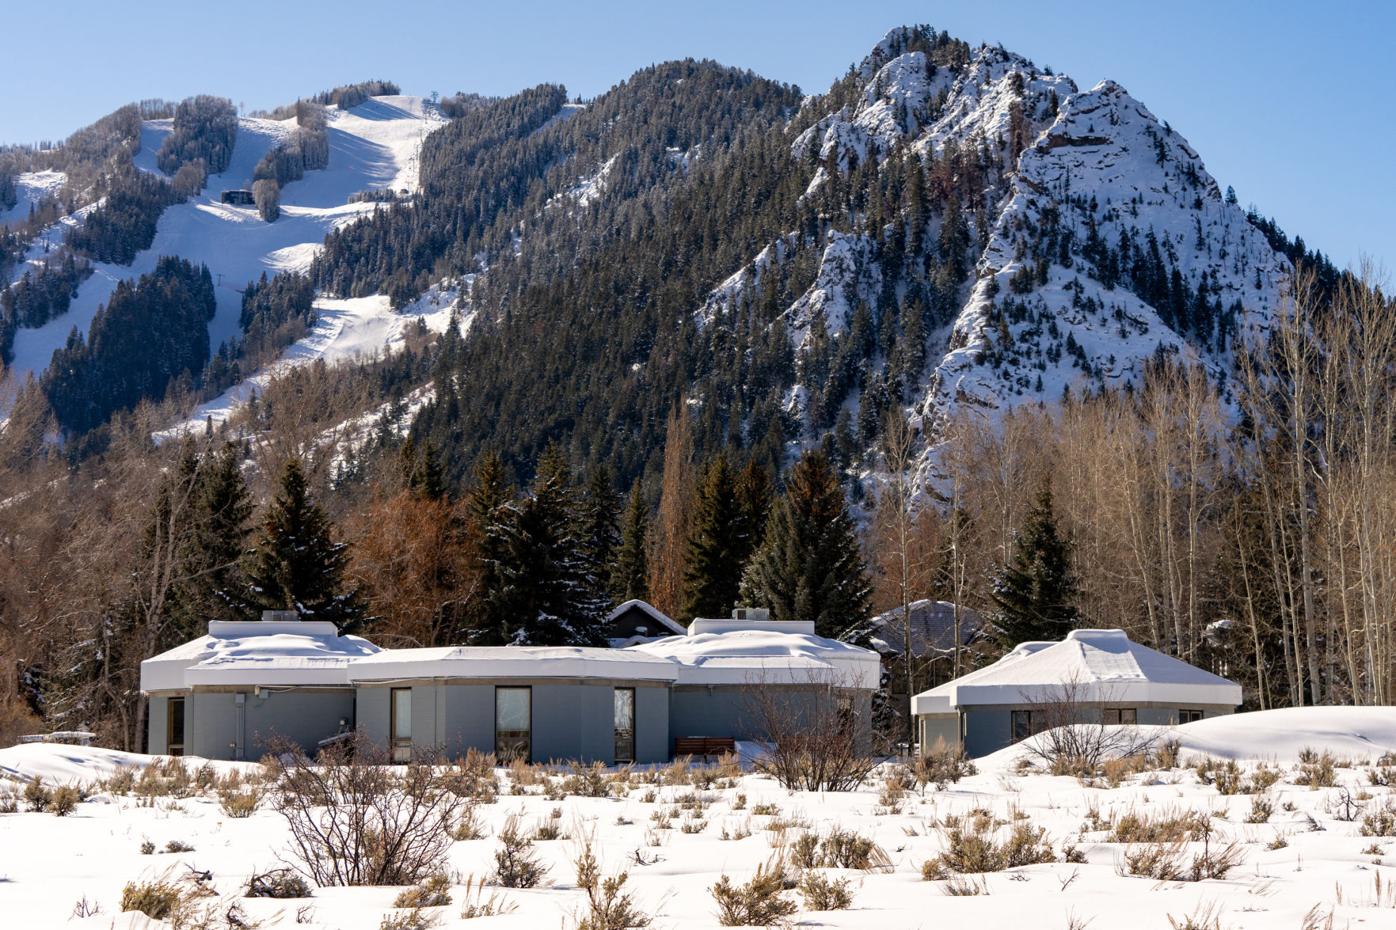 Bayer Center design team paying homage to iconic artist at Aspen Institute, News